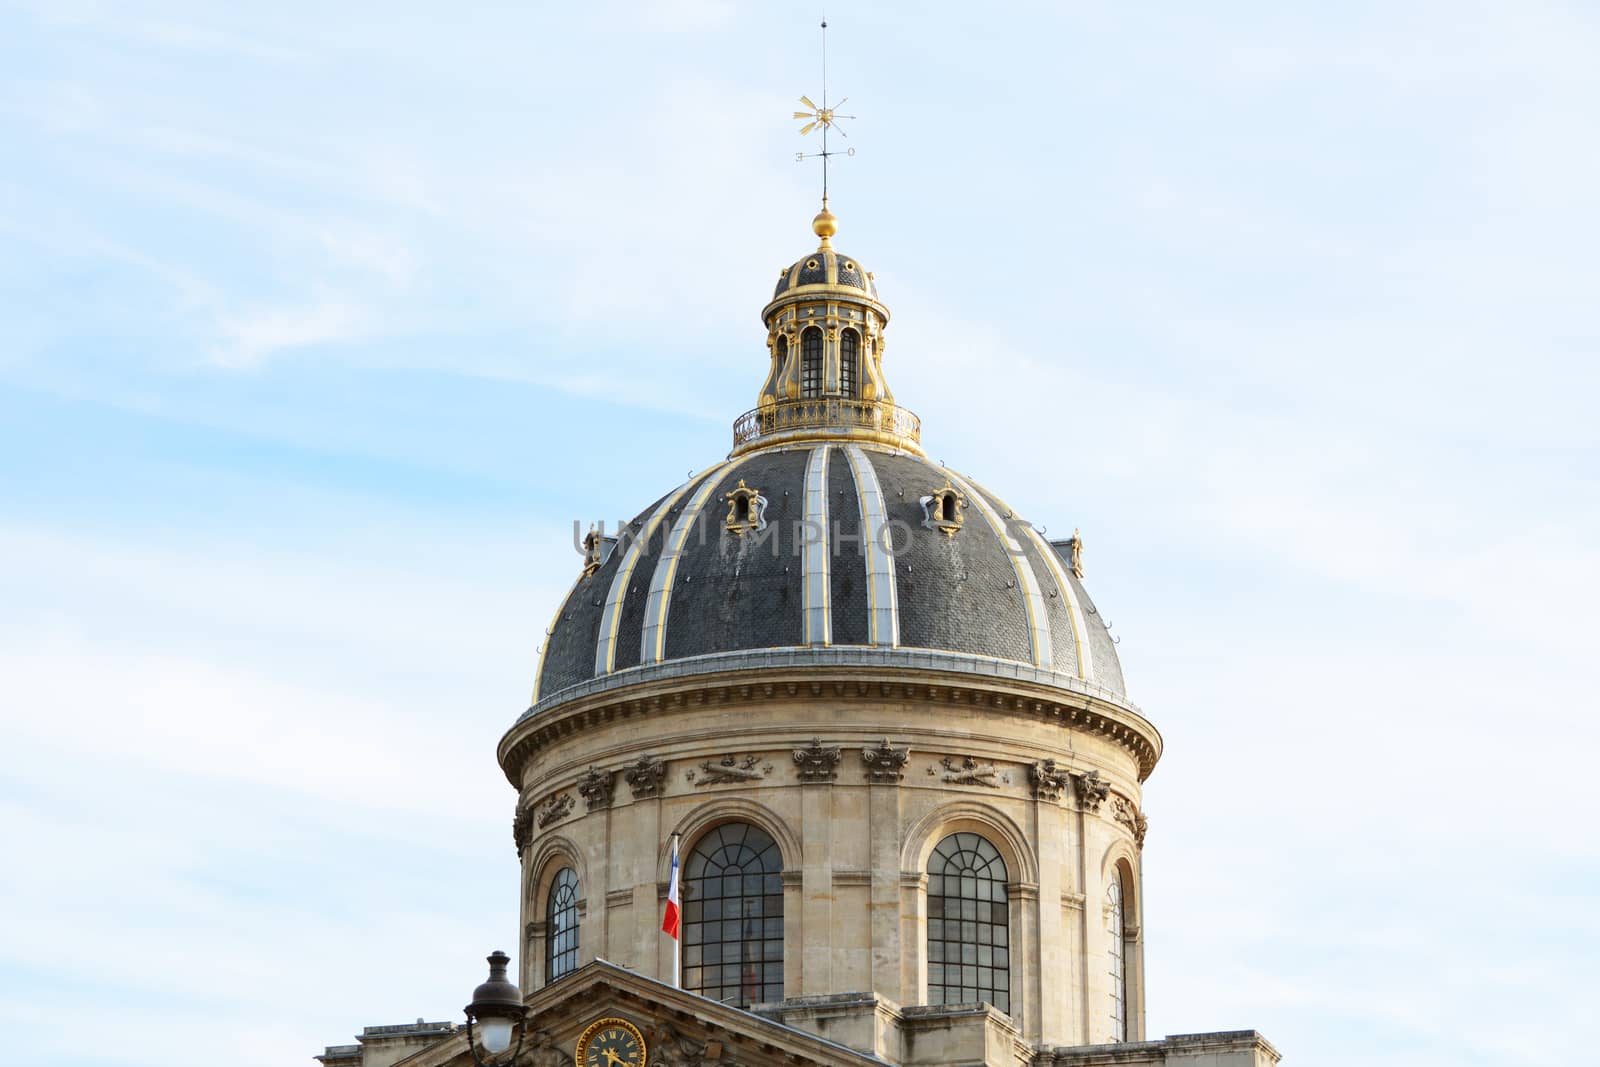 Ornate gilded dome and weather vane of the French Institute in Paris - Institut de France